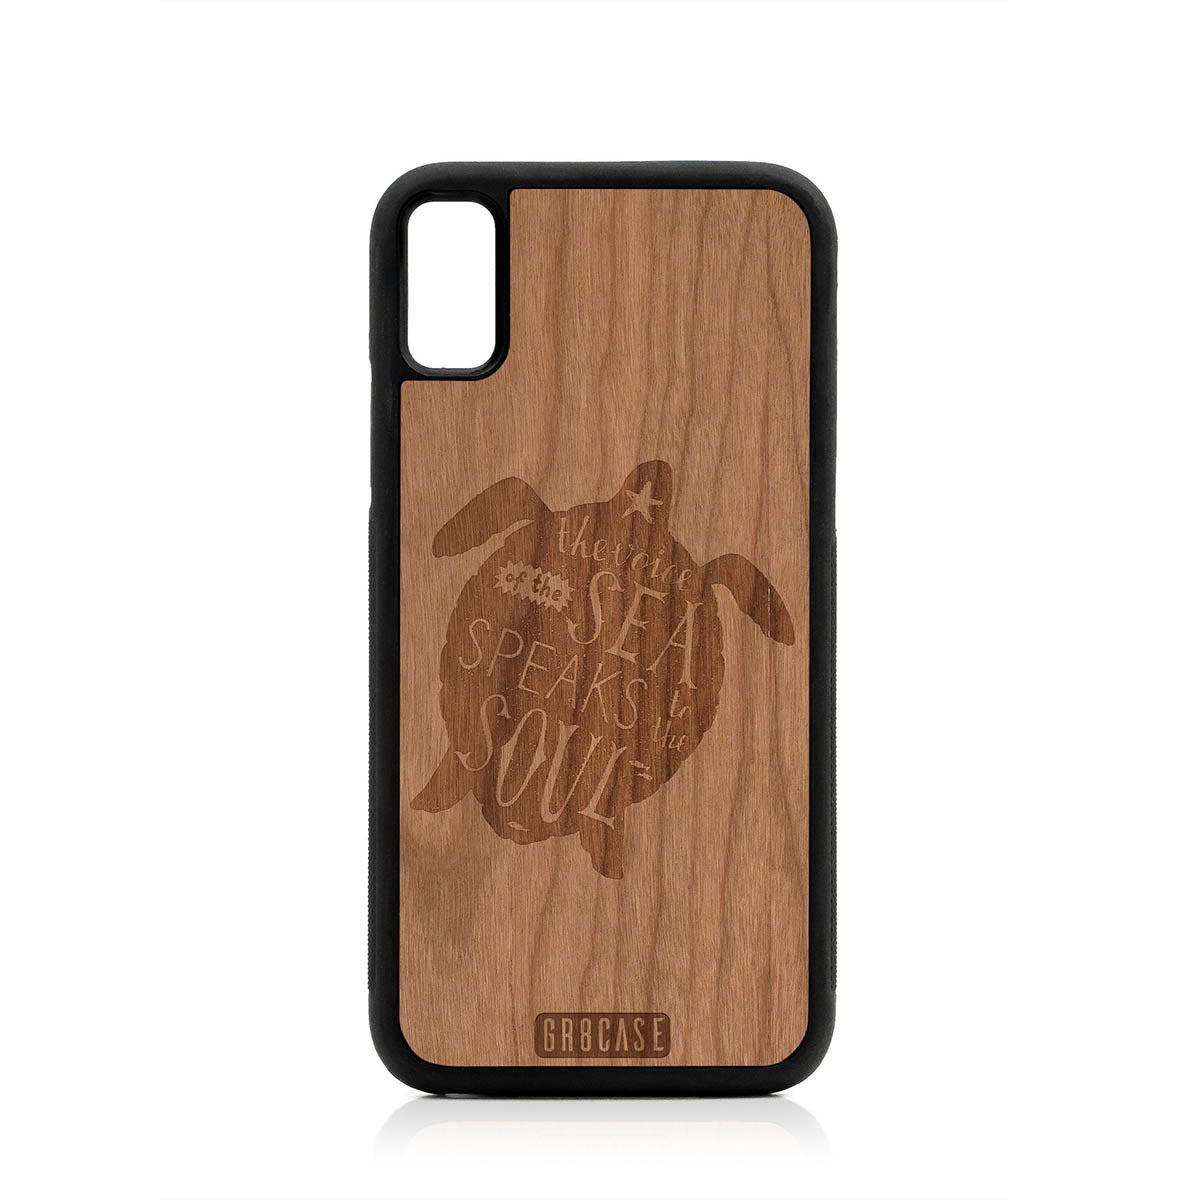 The Voice Of The Sea Speaks To The Soul (Turtle) Design Wood Case For iPhone X/XS